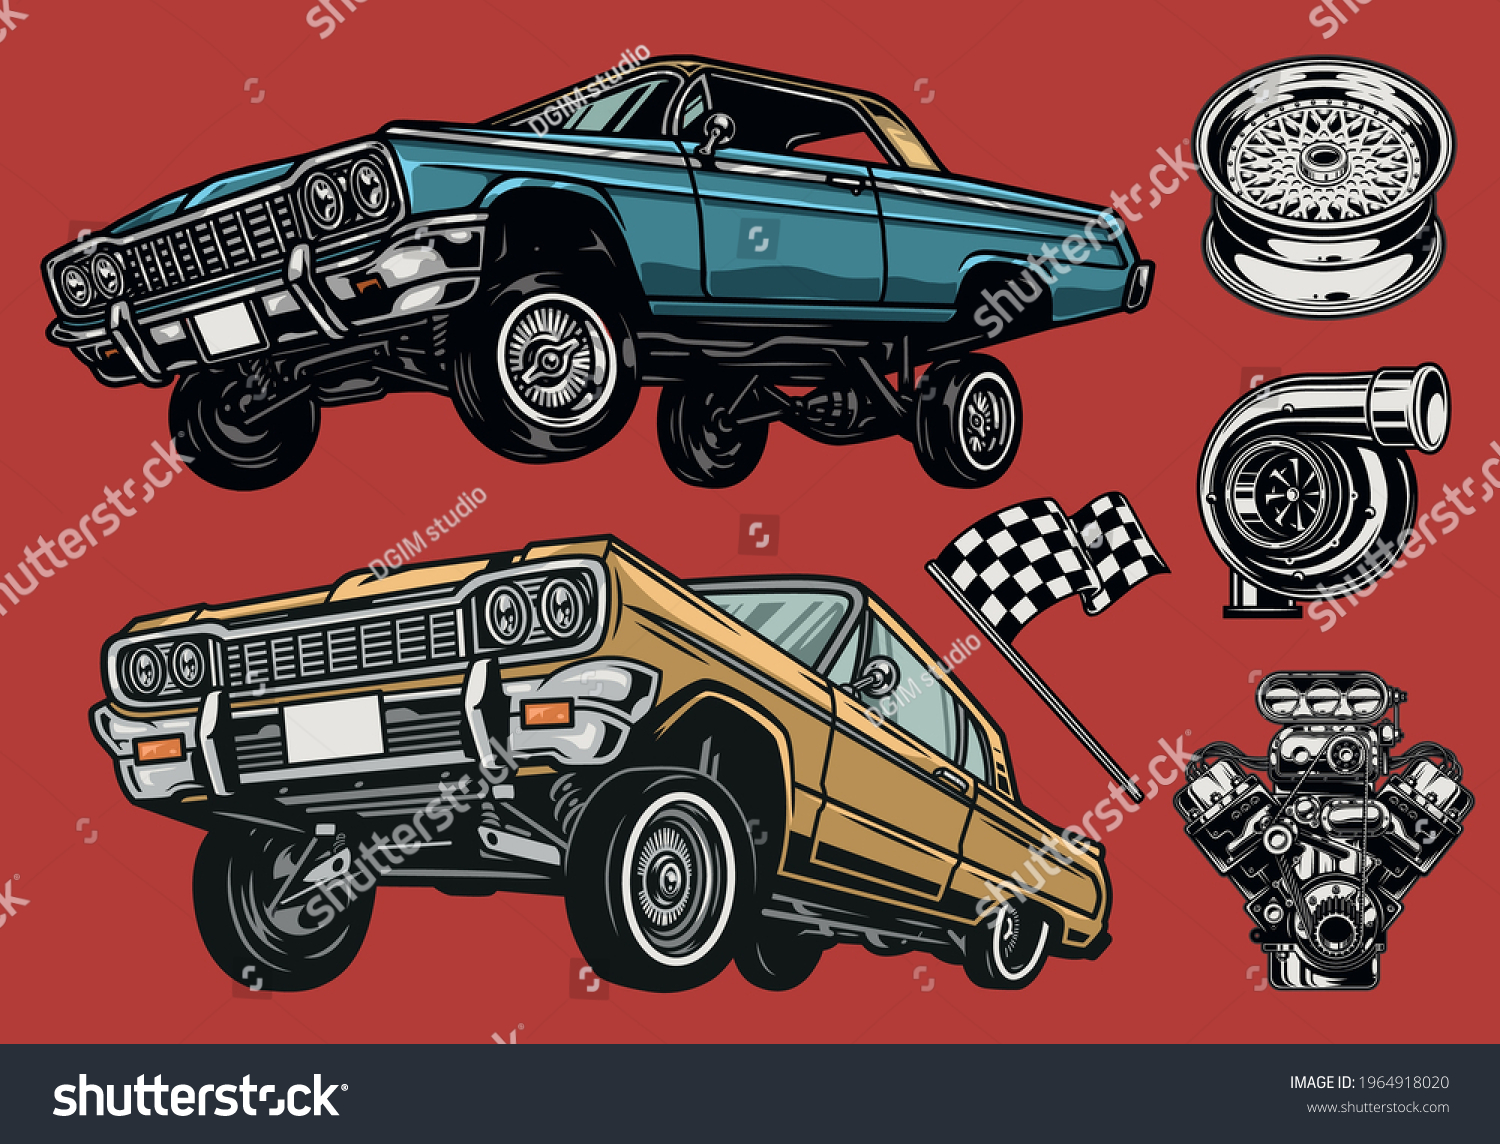 SVG of Custom cars and parts colorful concept with lowrider cars racing checkered flag wheel rim turbocharger and engine isolated vector illustration svg